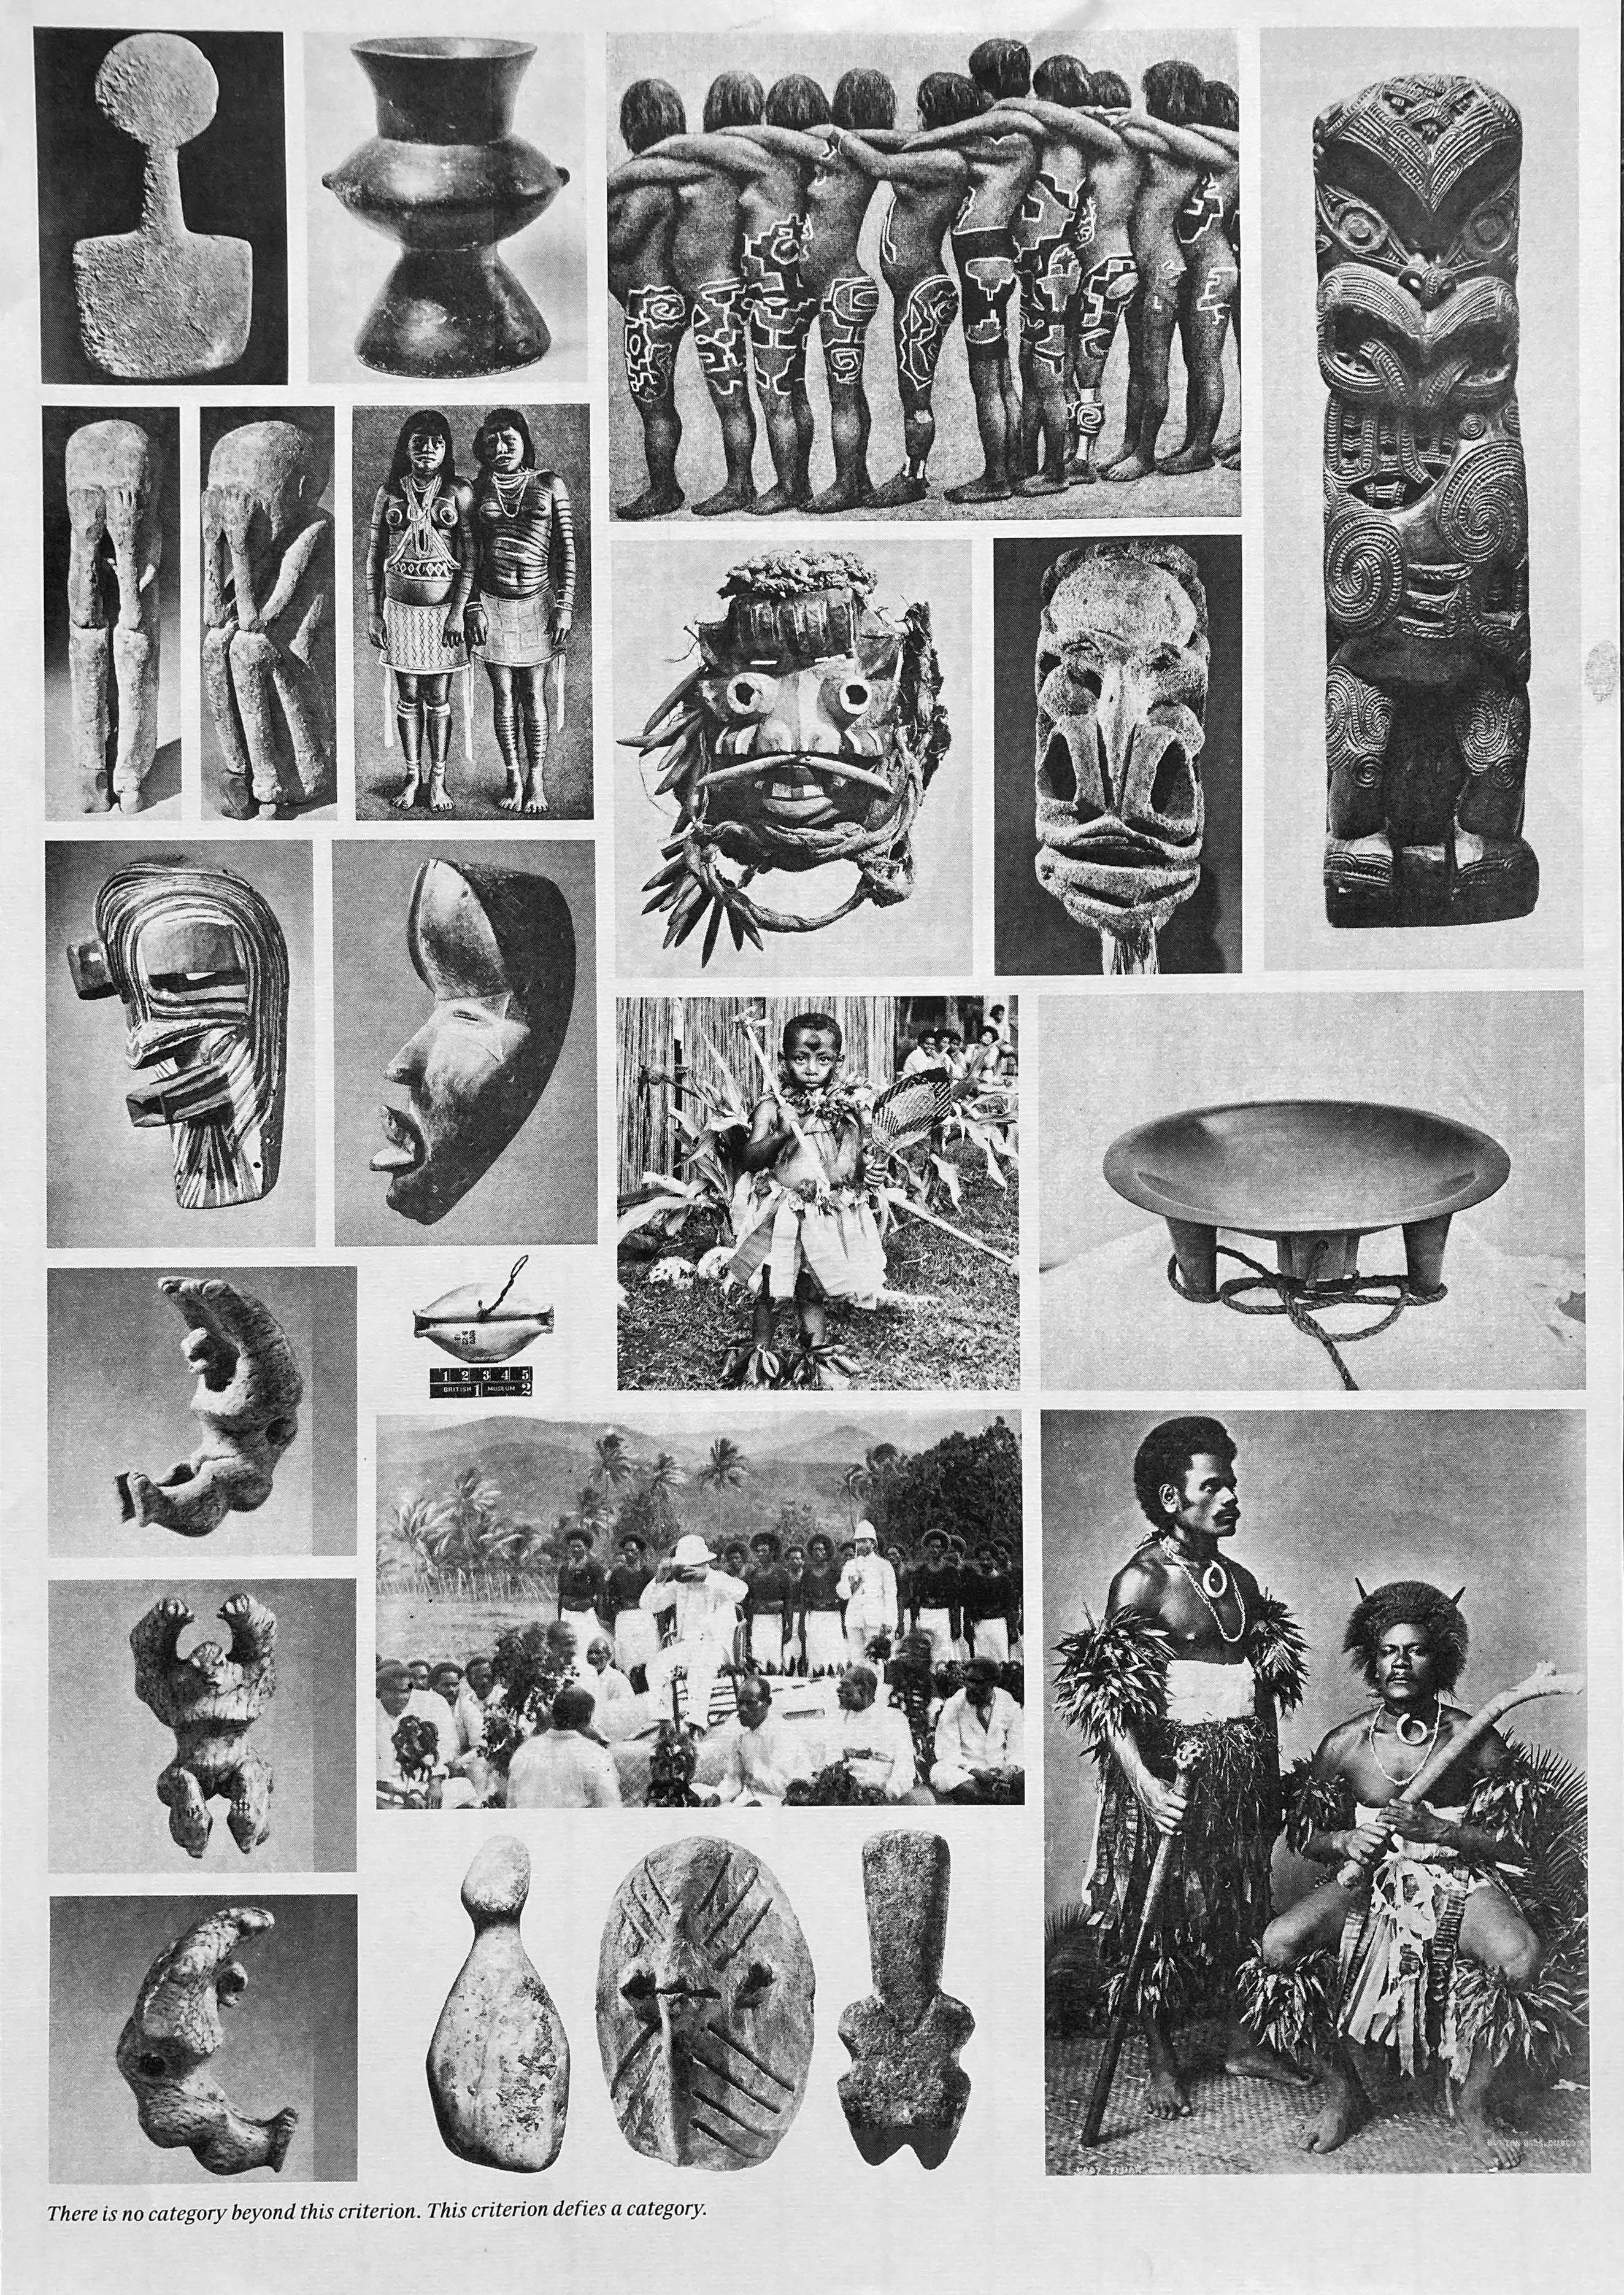 Collection of archival images showing objects from all over the world. Black and white collage.